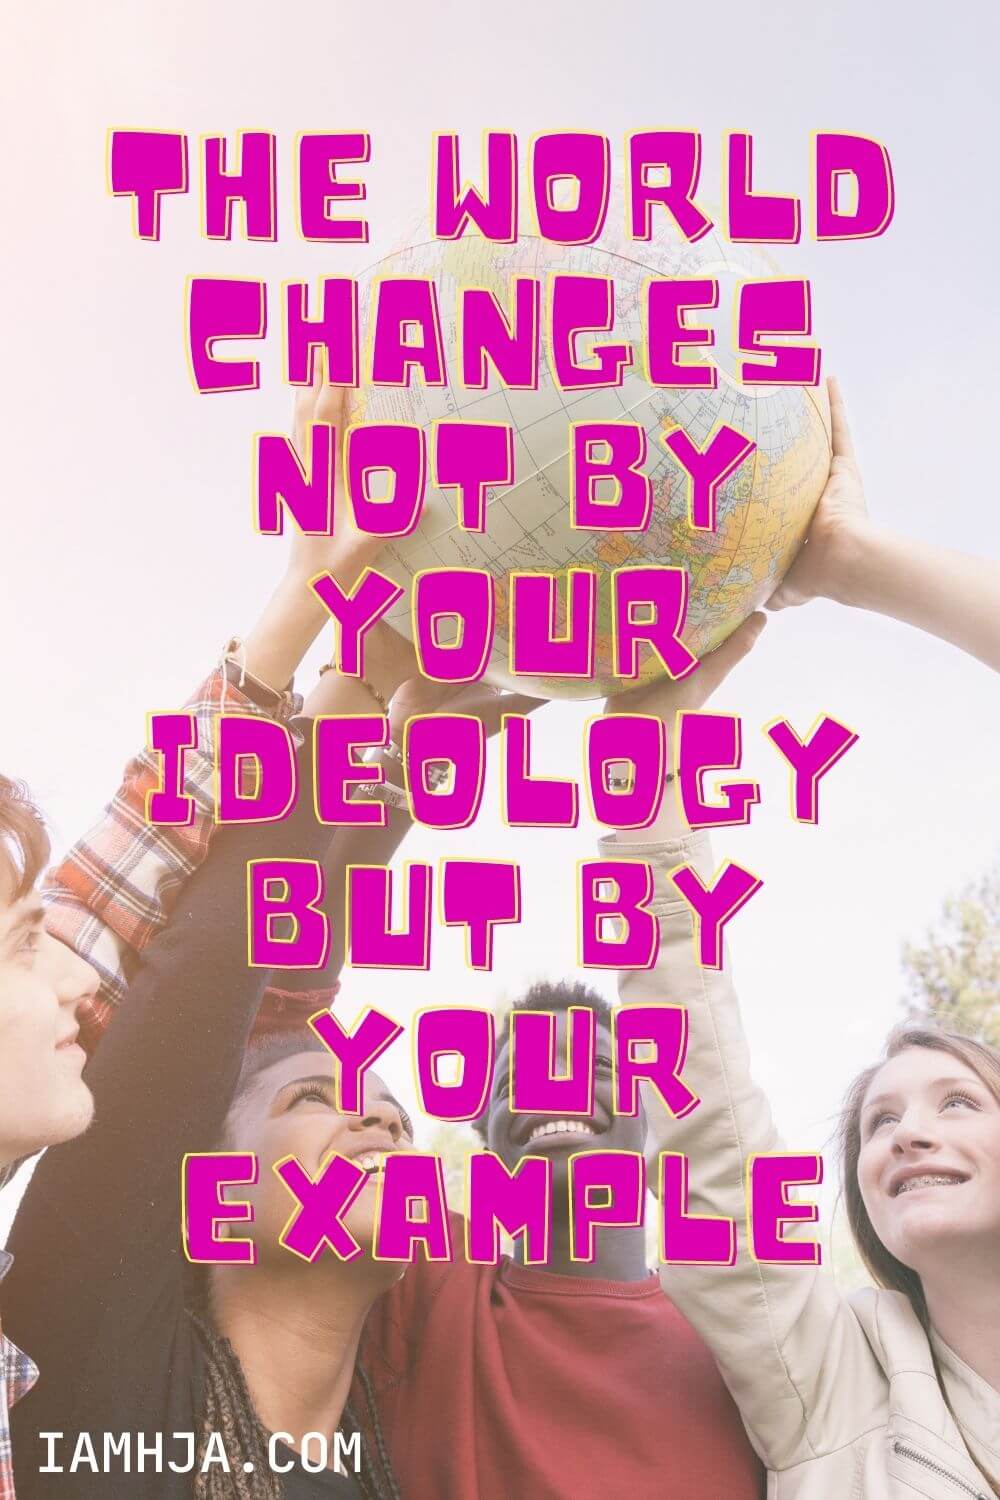 The world changes not by your ideology but by your example